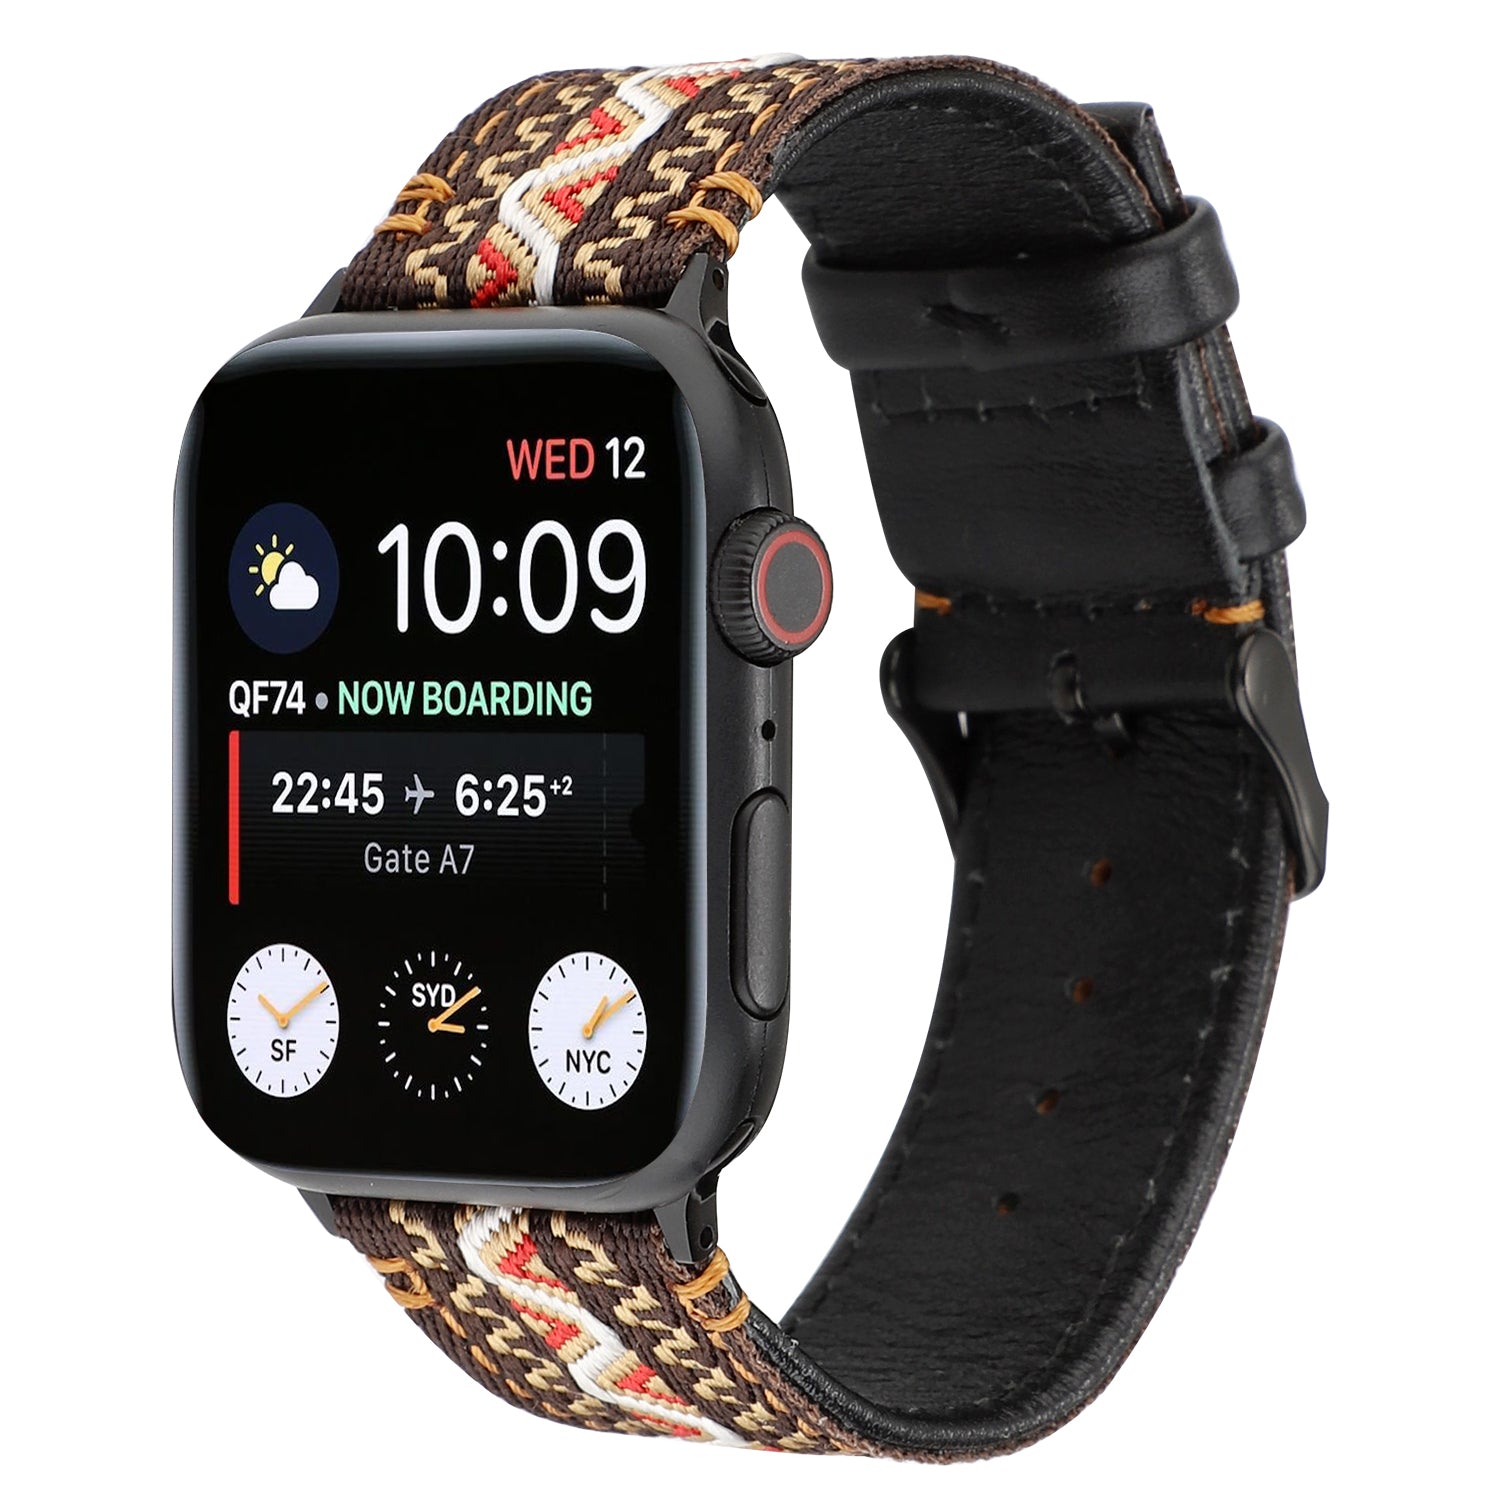 Boho-DreamWeave Leather Band For Apple Watch Multiple Colors Available